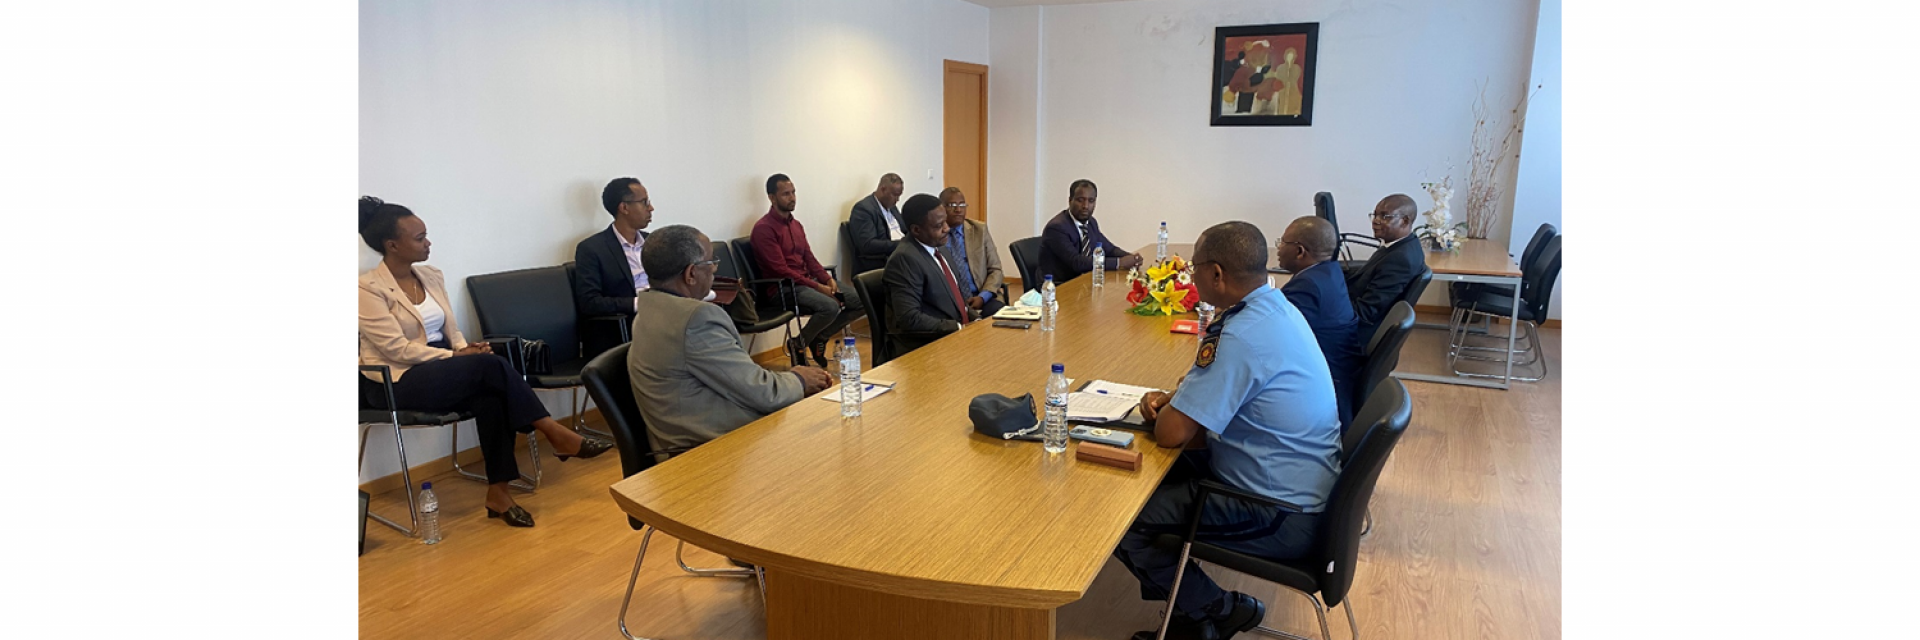 The study tour to the Mozambique revenue authority with FDRE officials